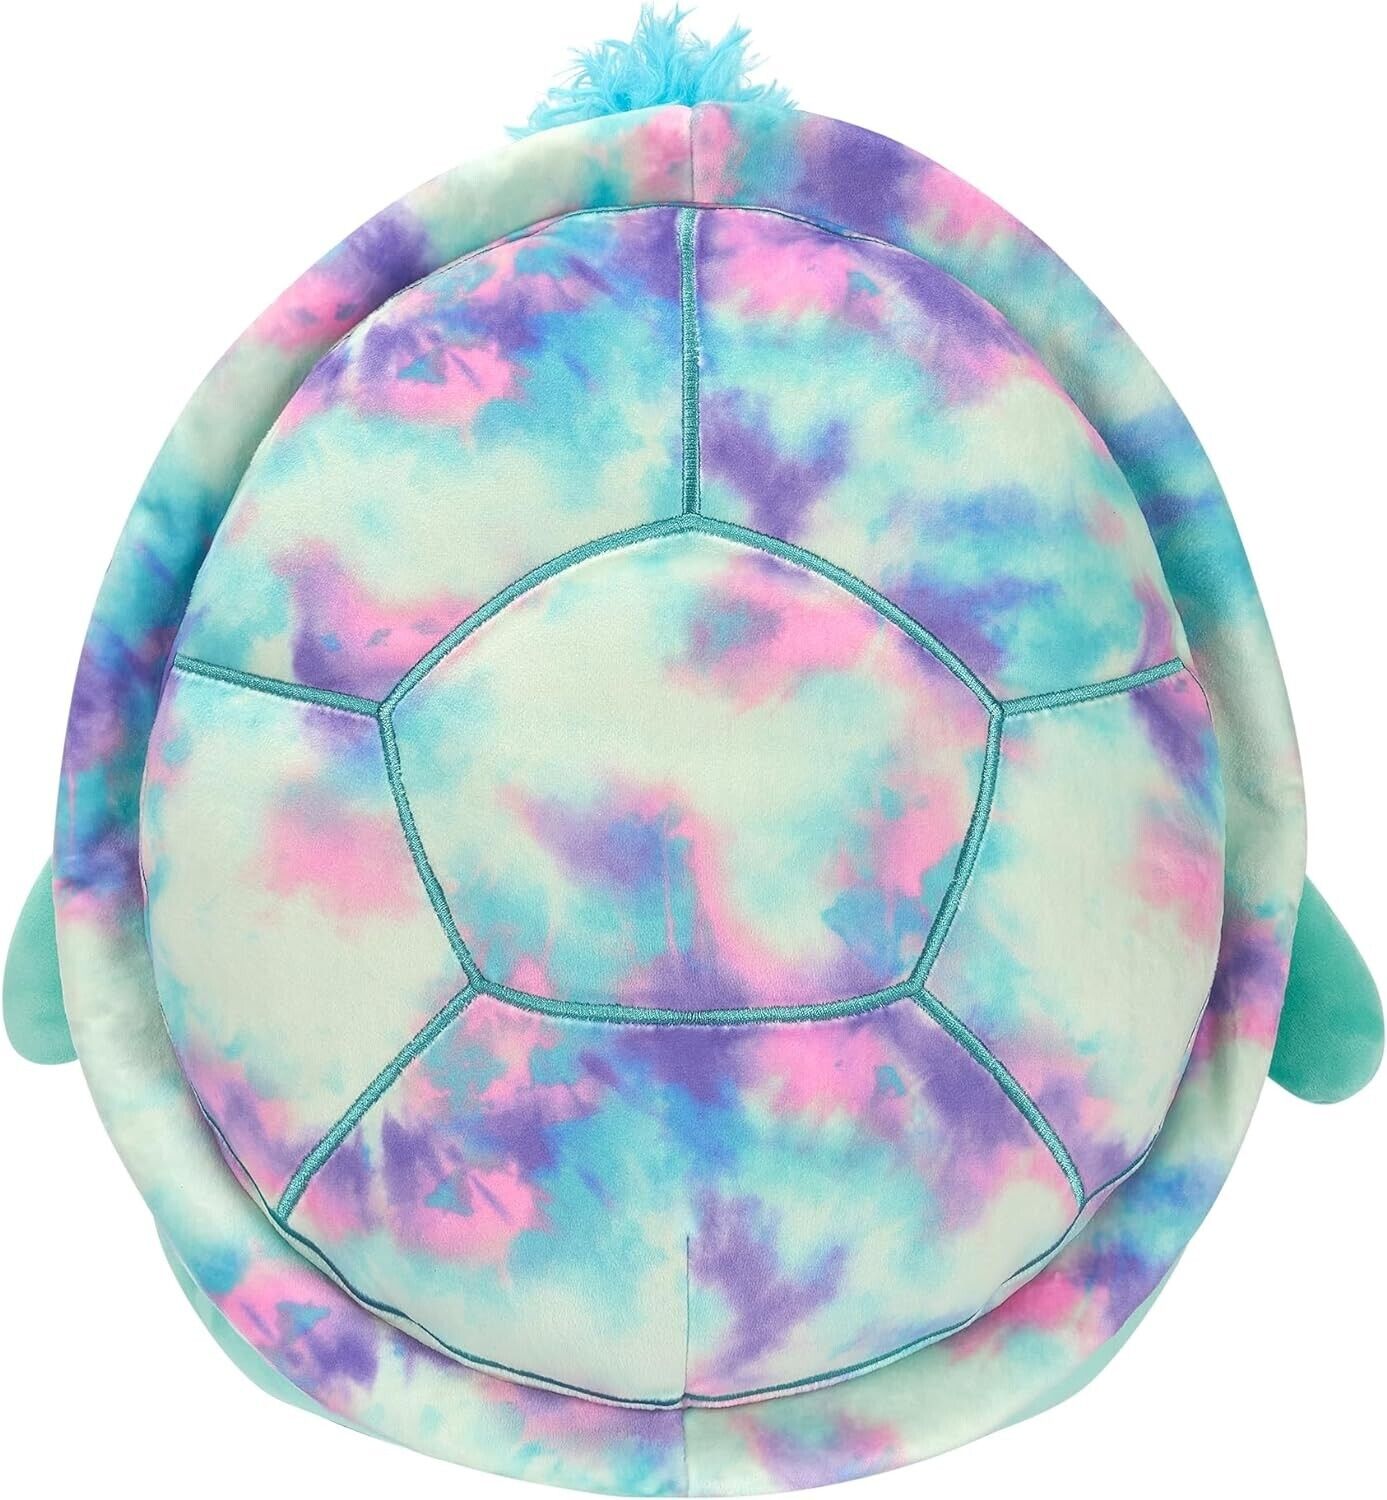 Squishmallows SQCR05477 16-Inch-Cascade The Teal Turtle with Tie-Dye Shell, Mult